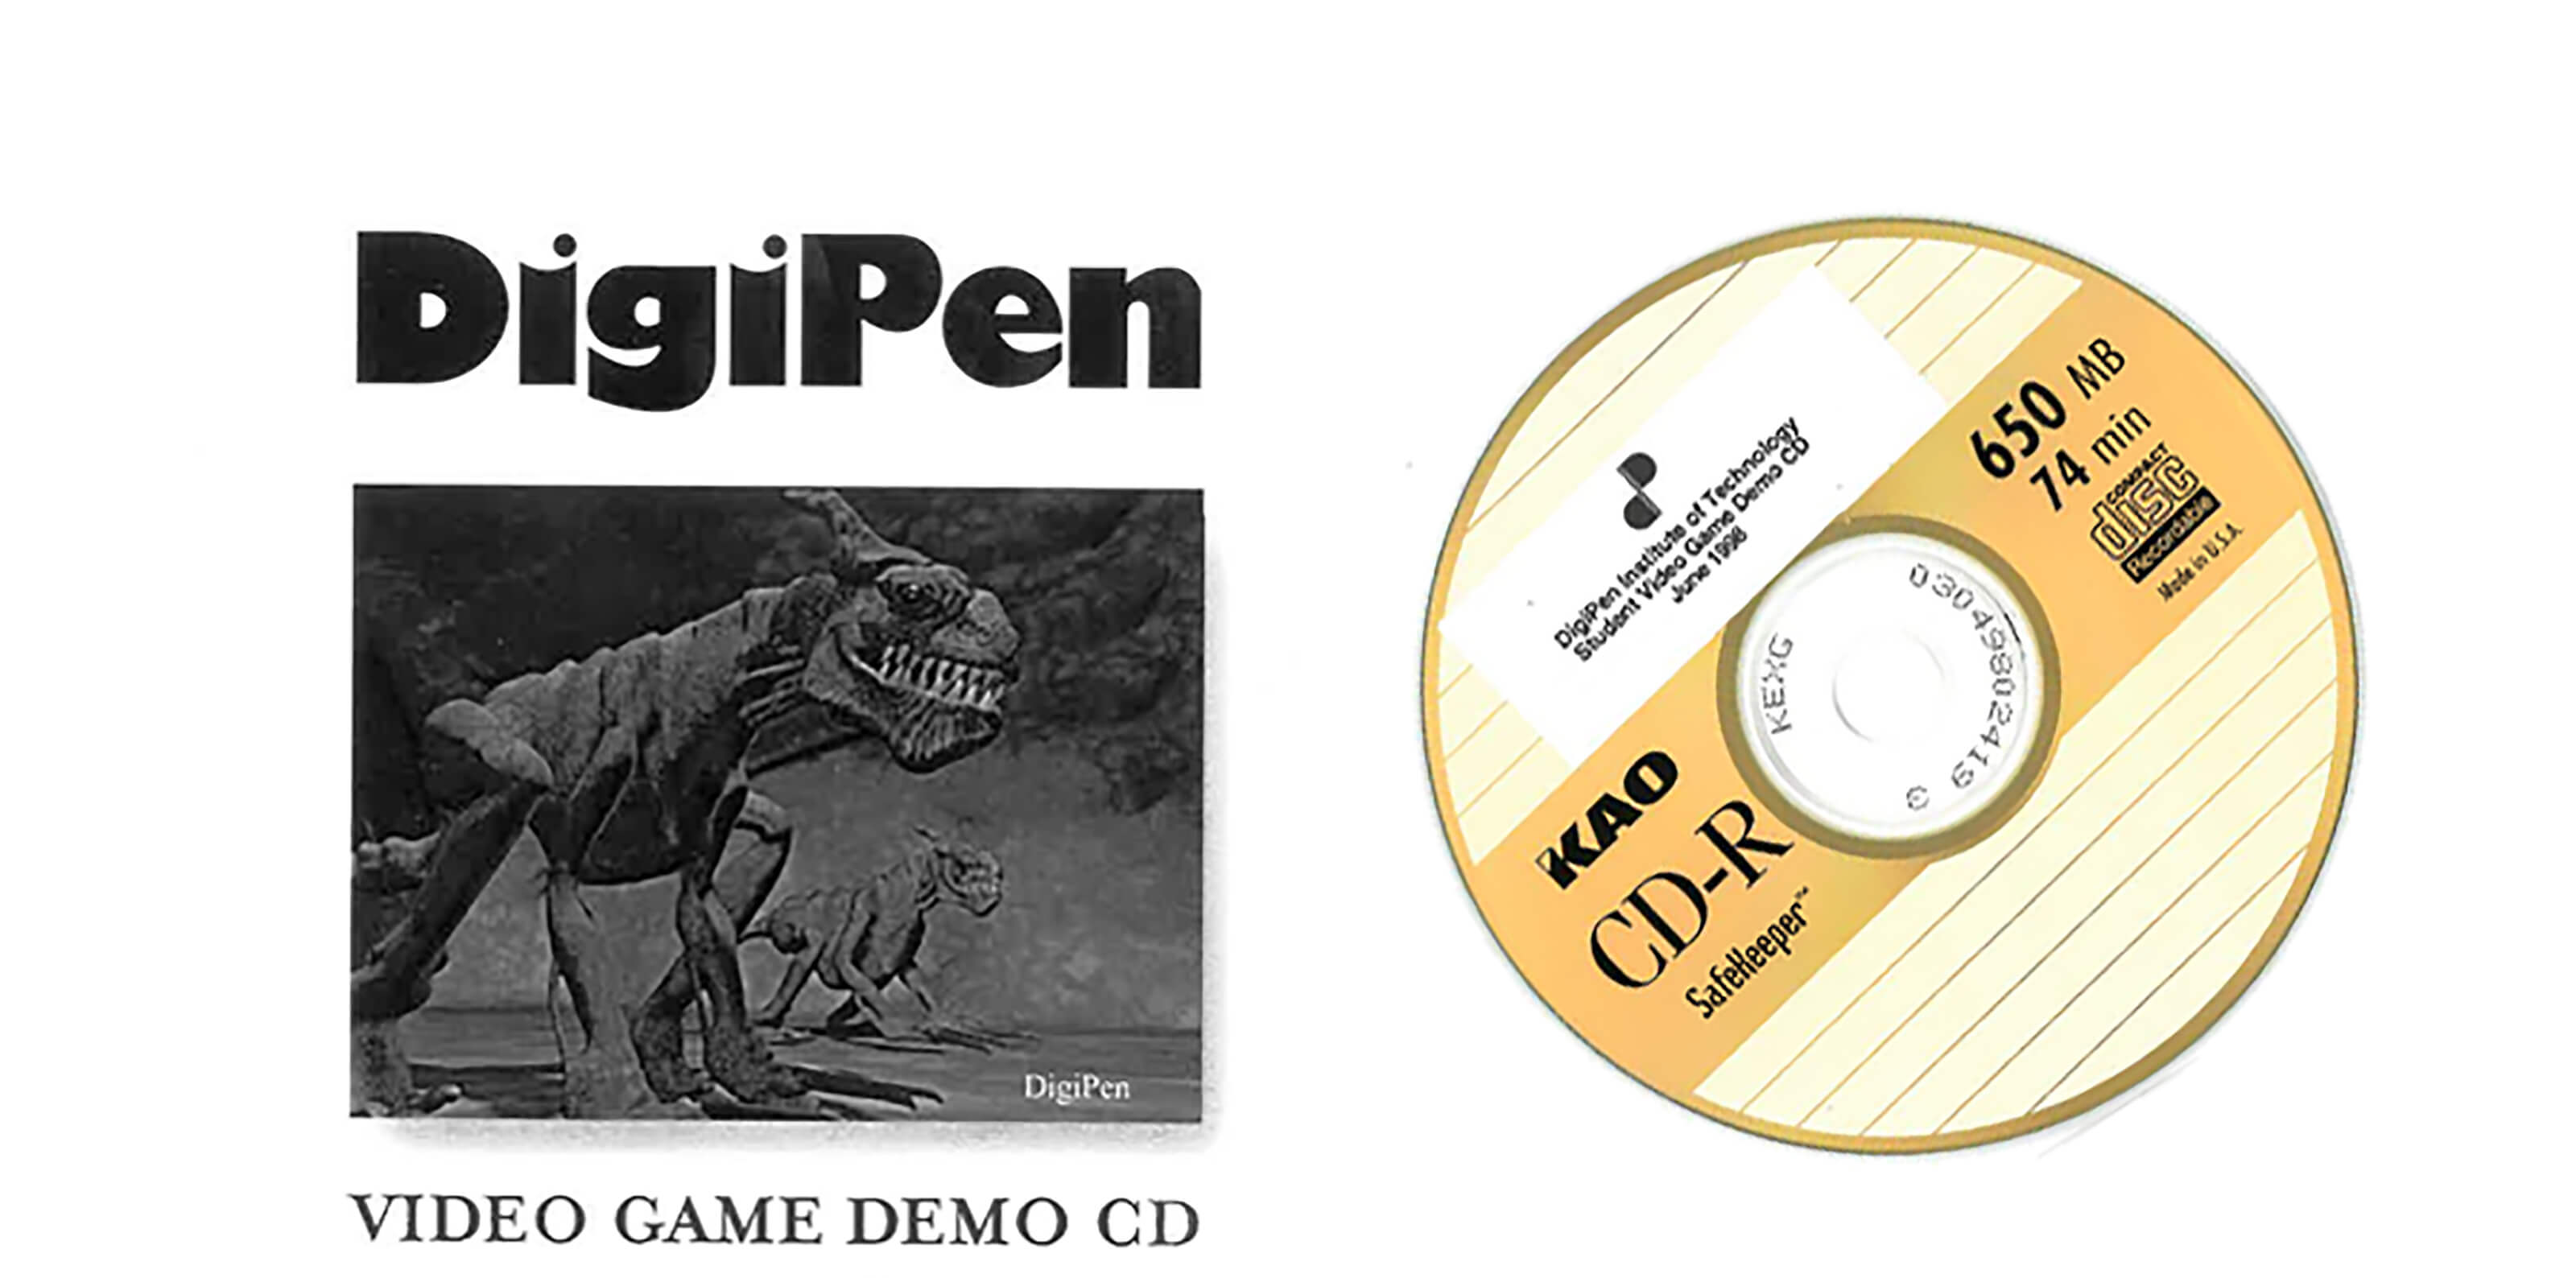 A picture of the 1998 DigiPen student video game demo CD.